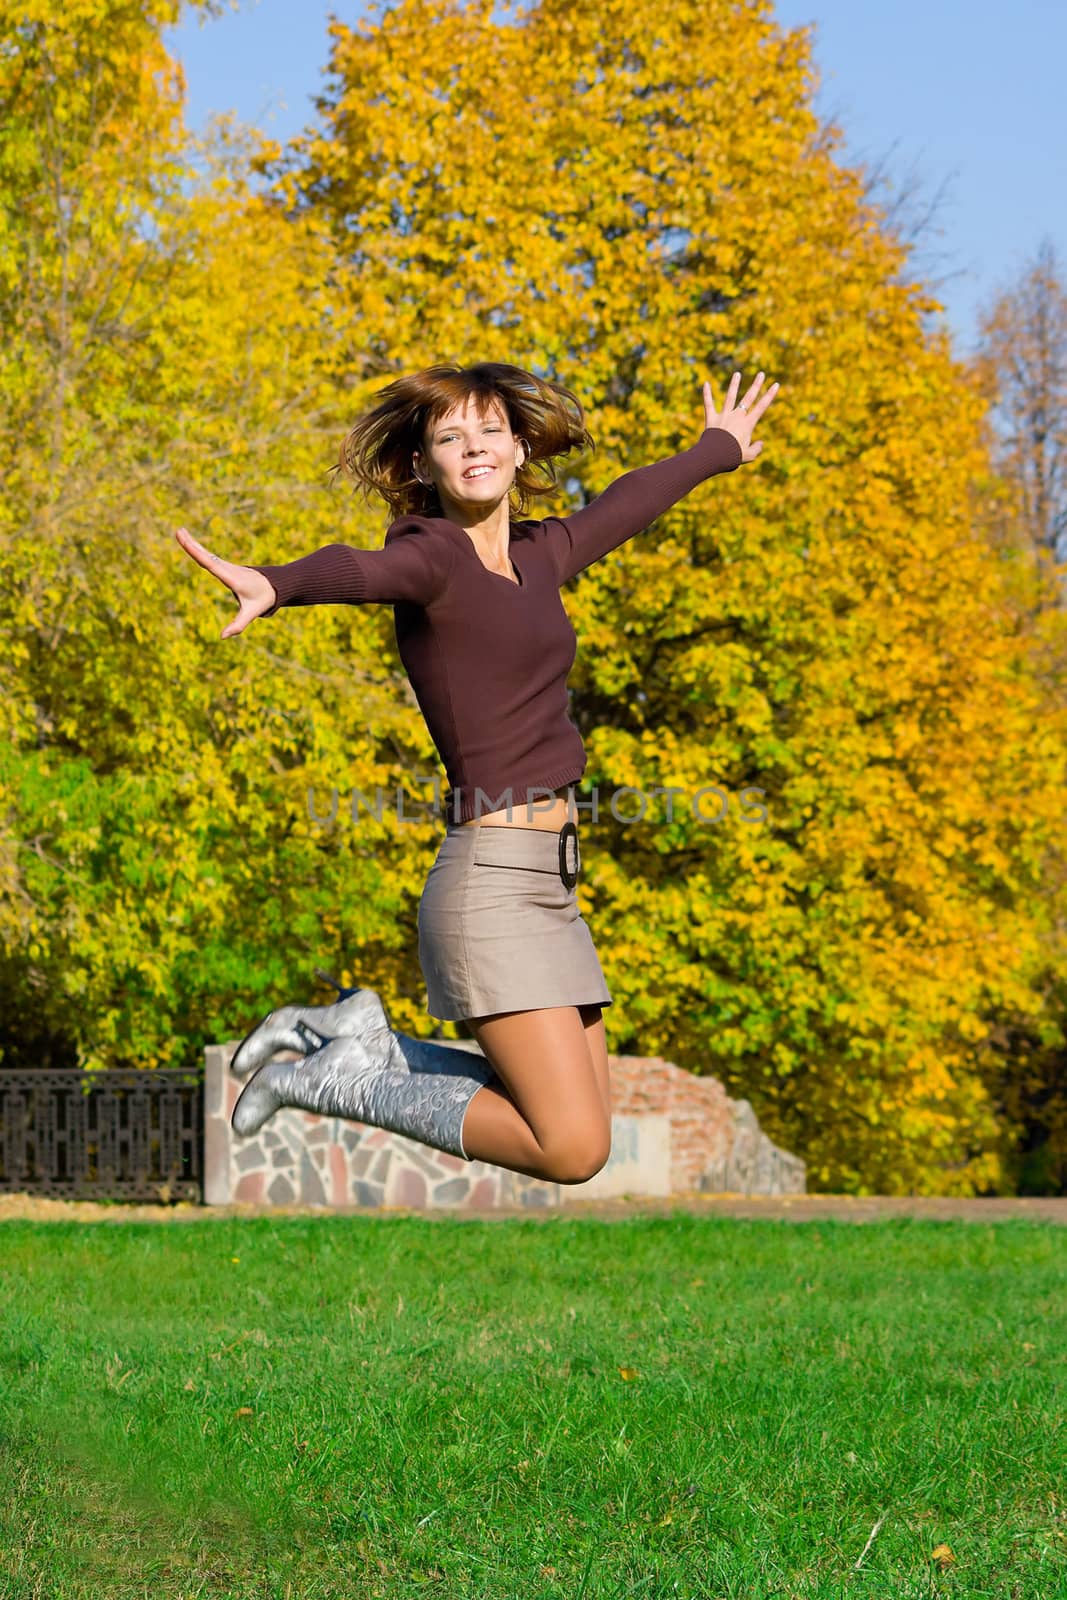 The nice jumping girl against the autumn nature